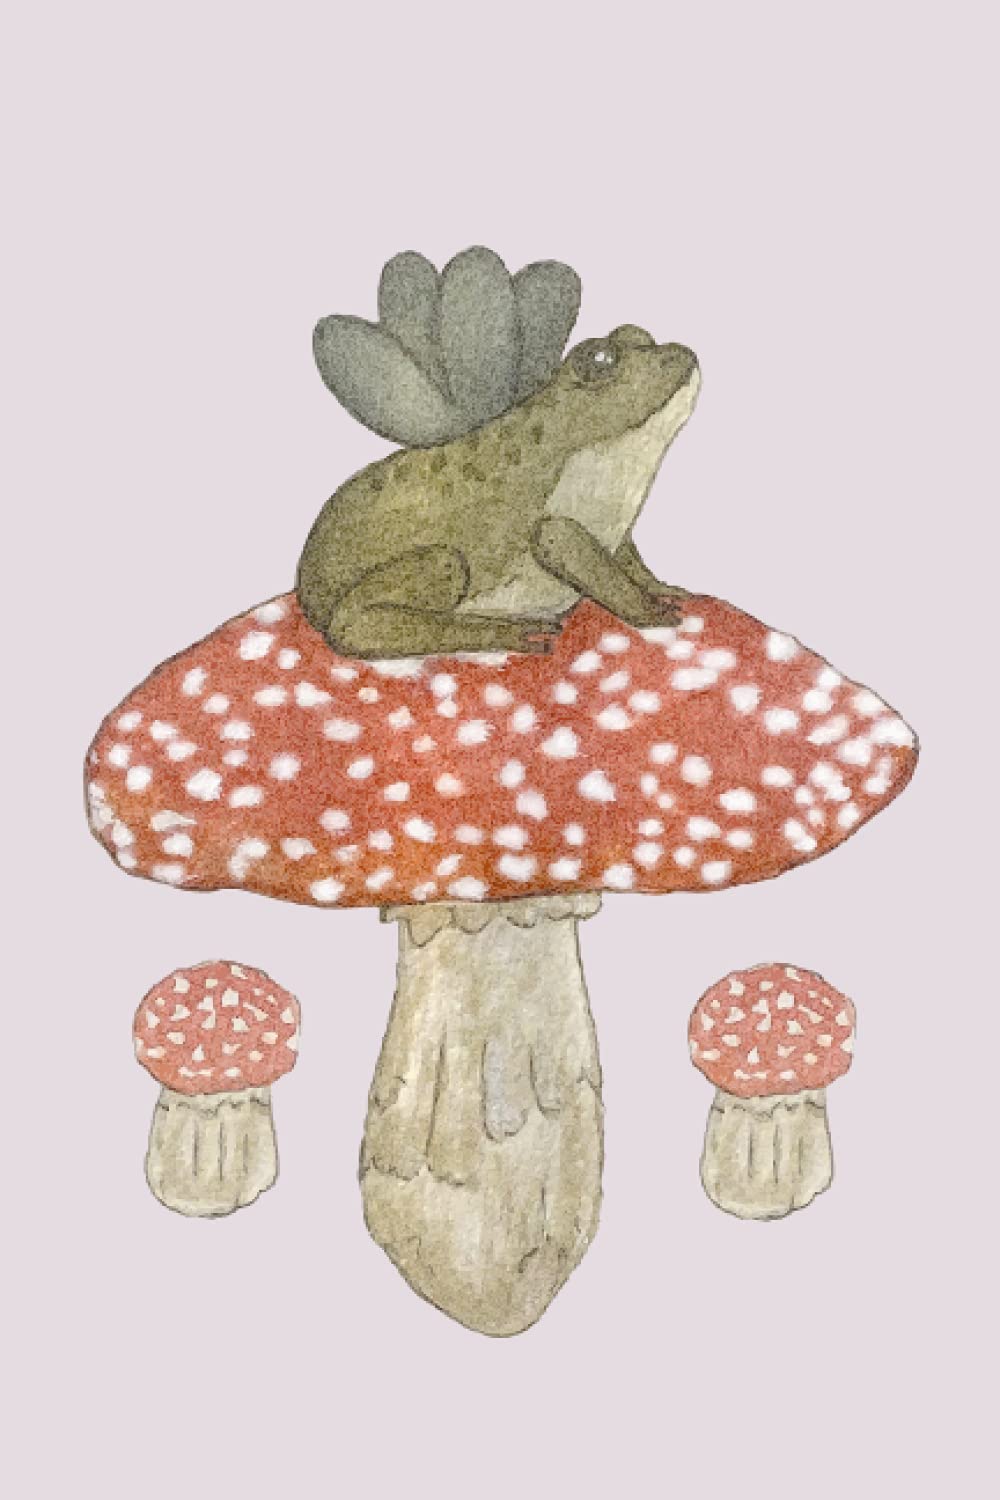 A watercolour painting of a green frog sitting on a red mushroom - Goblincore